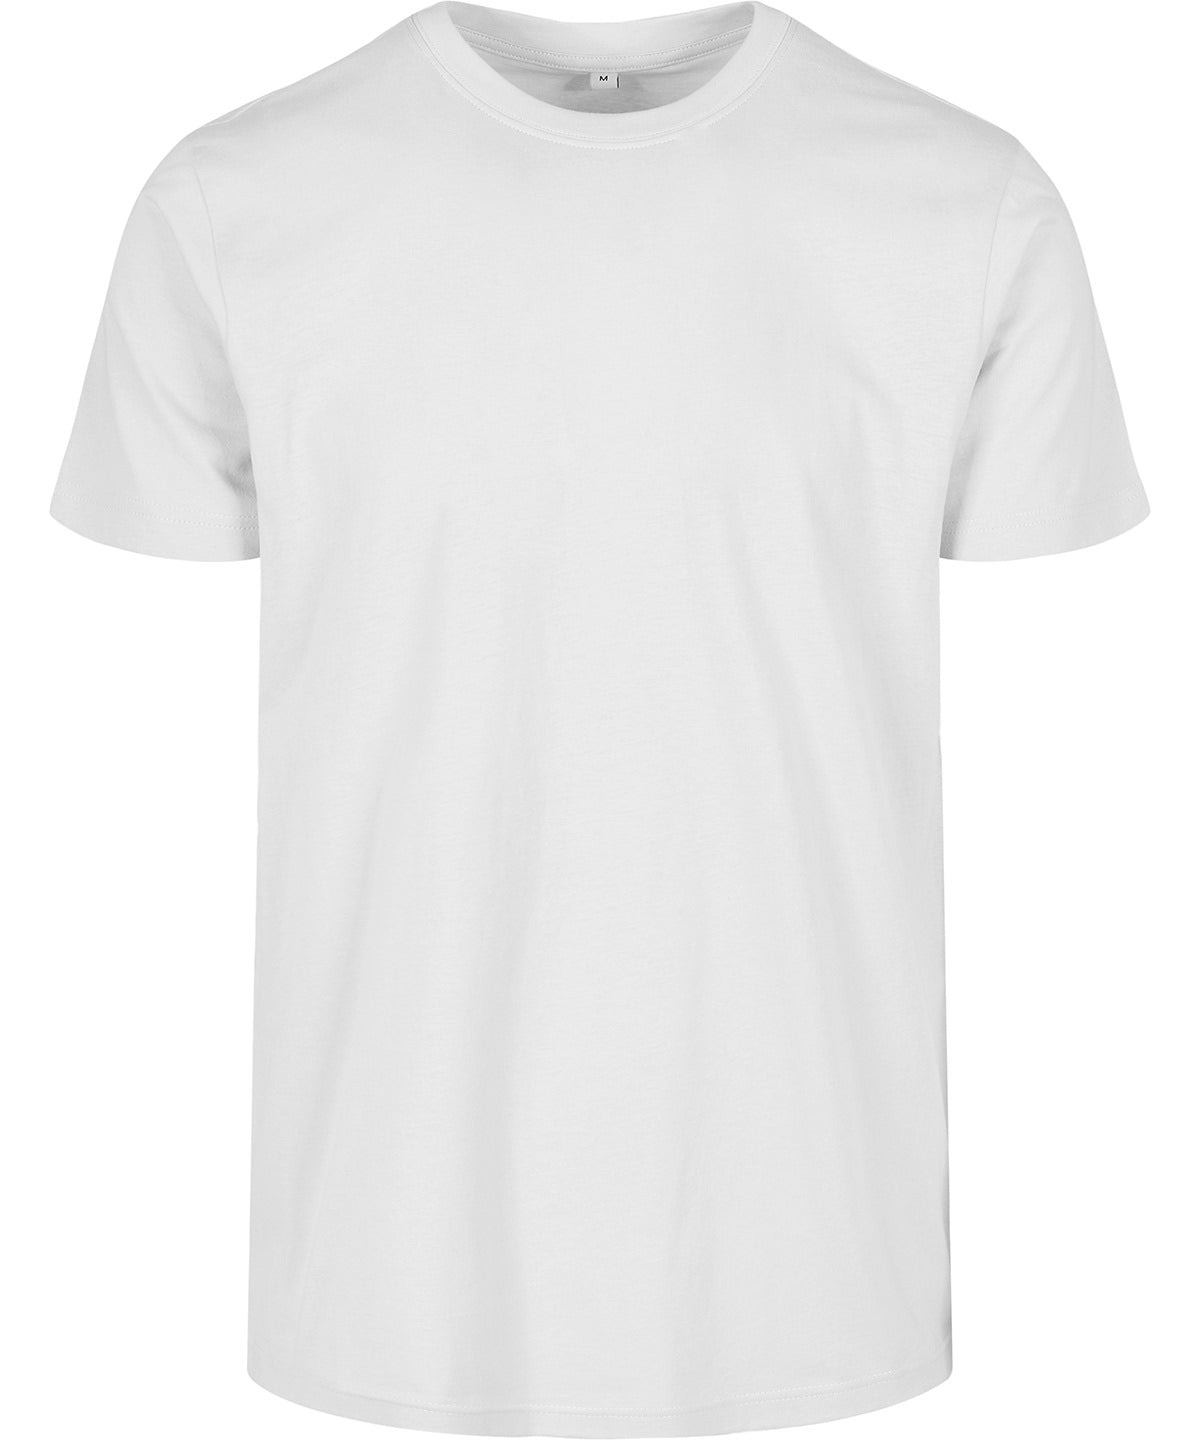 Personalised T-Shirts - Natural Build Your Brand Basic Basic round neck tee